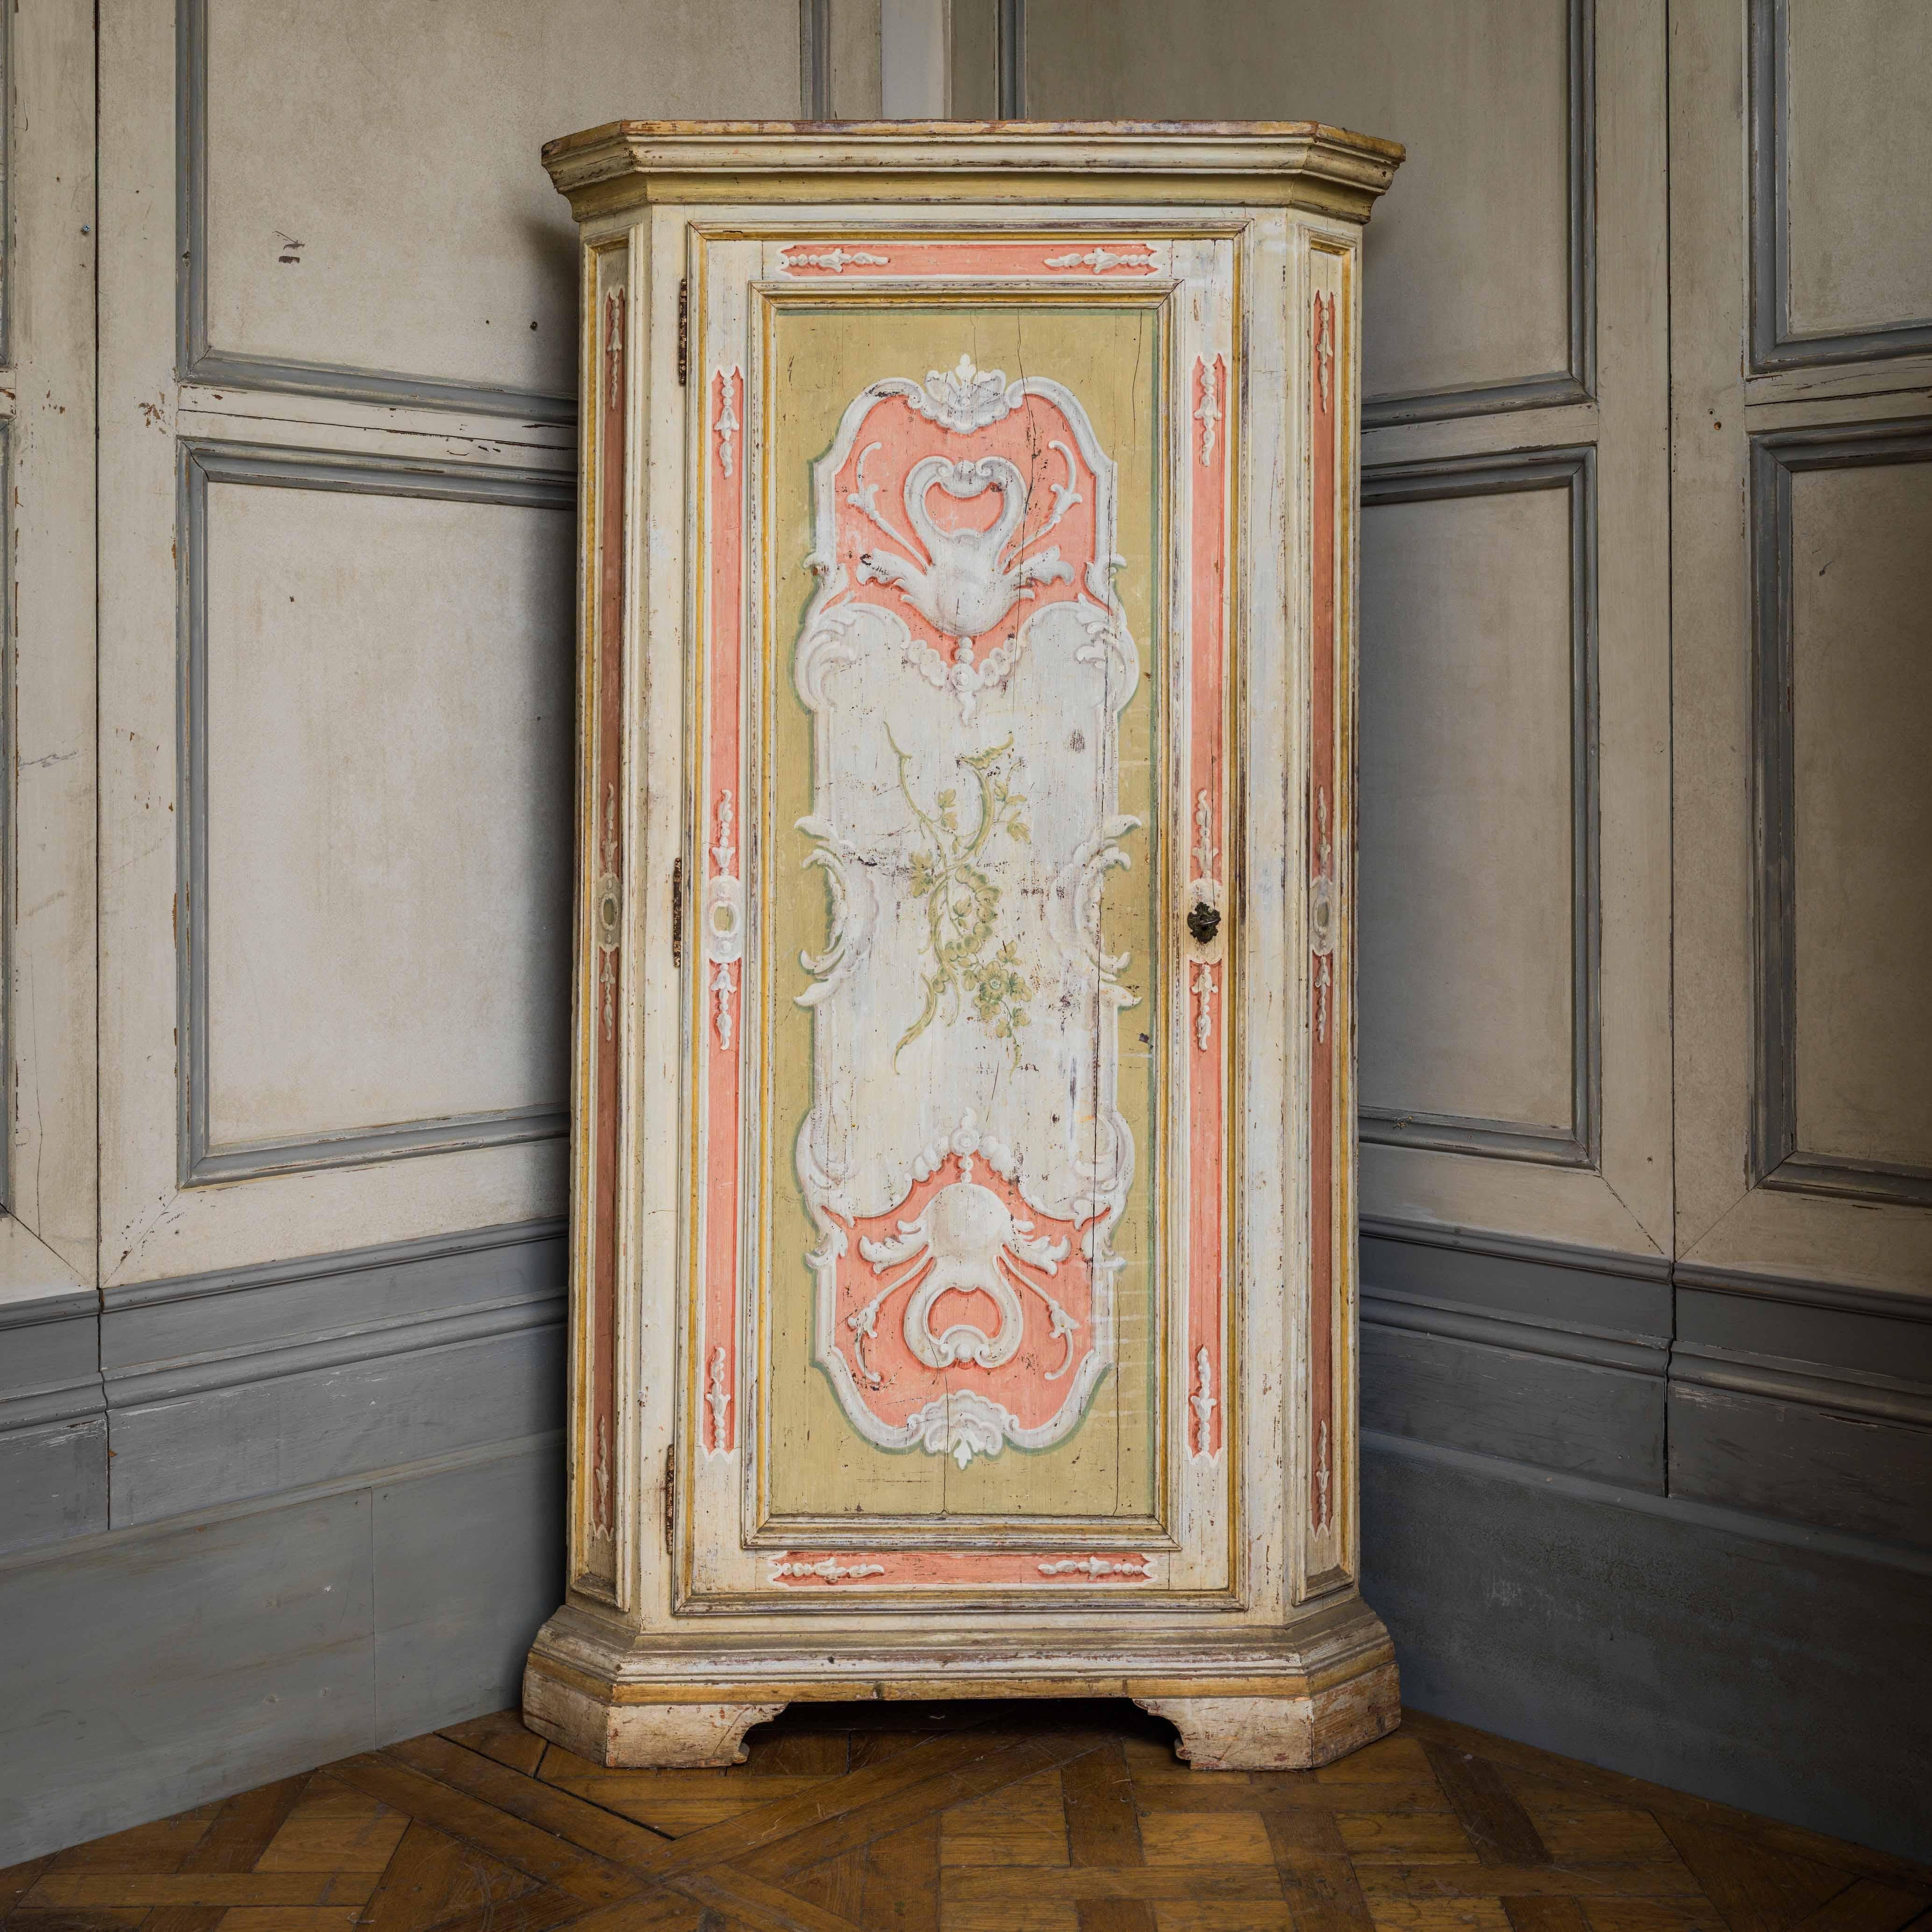 A pair of Italian, 19th century corner cabinets, hand painted in a lyrical Rococo style with a lively palette of pink, stone green and white highlights. The surprise inside, is that the pieces have been fully lined in a vintage floral paper of